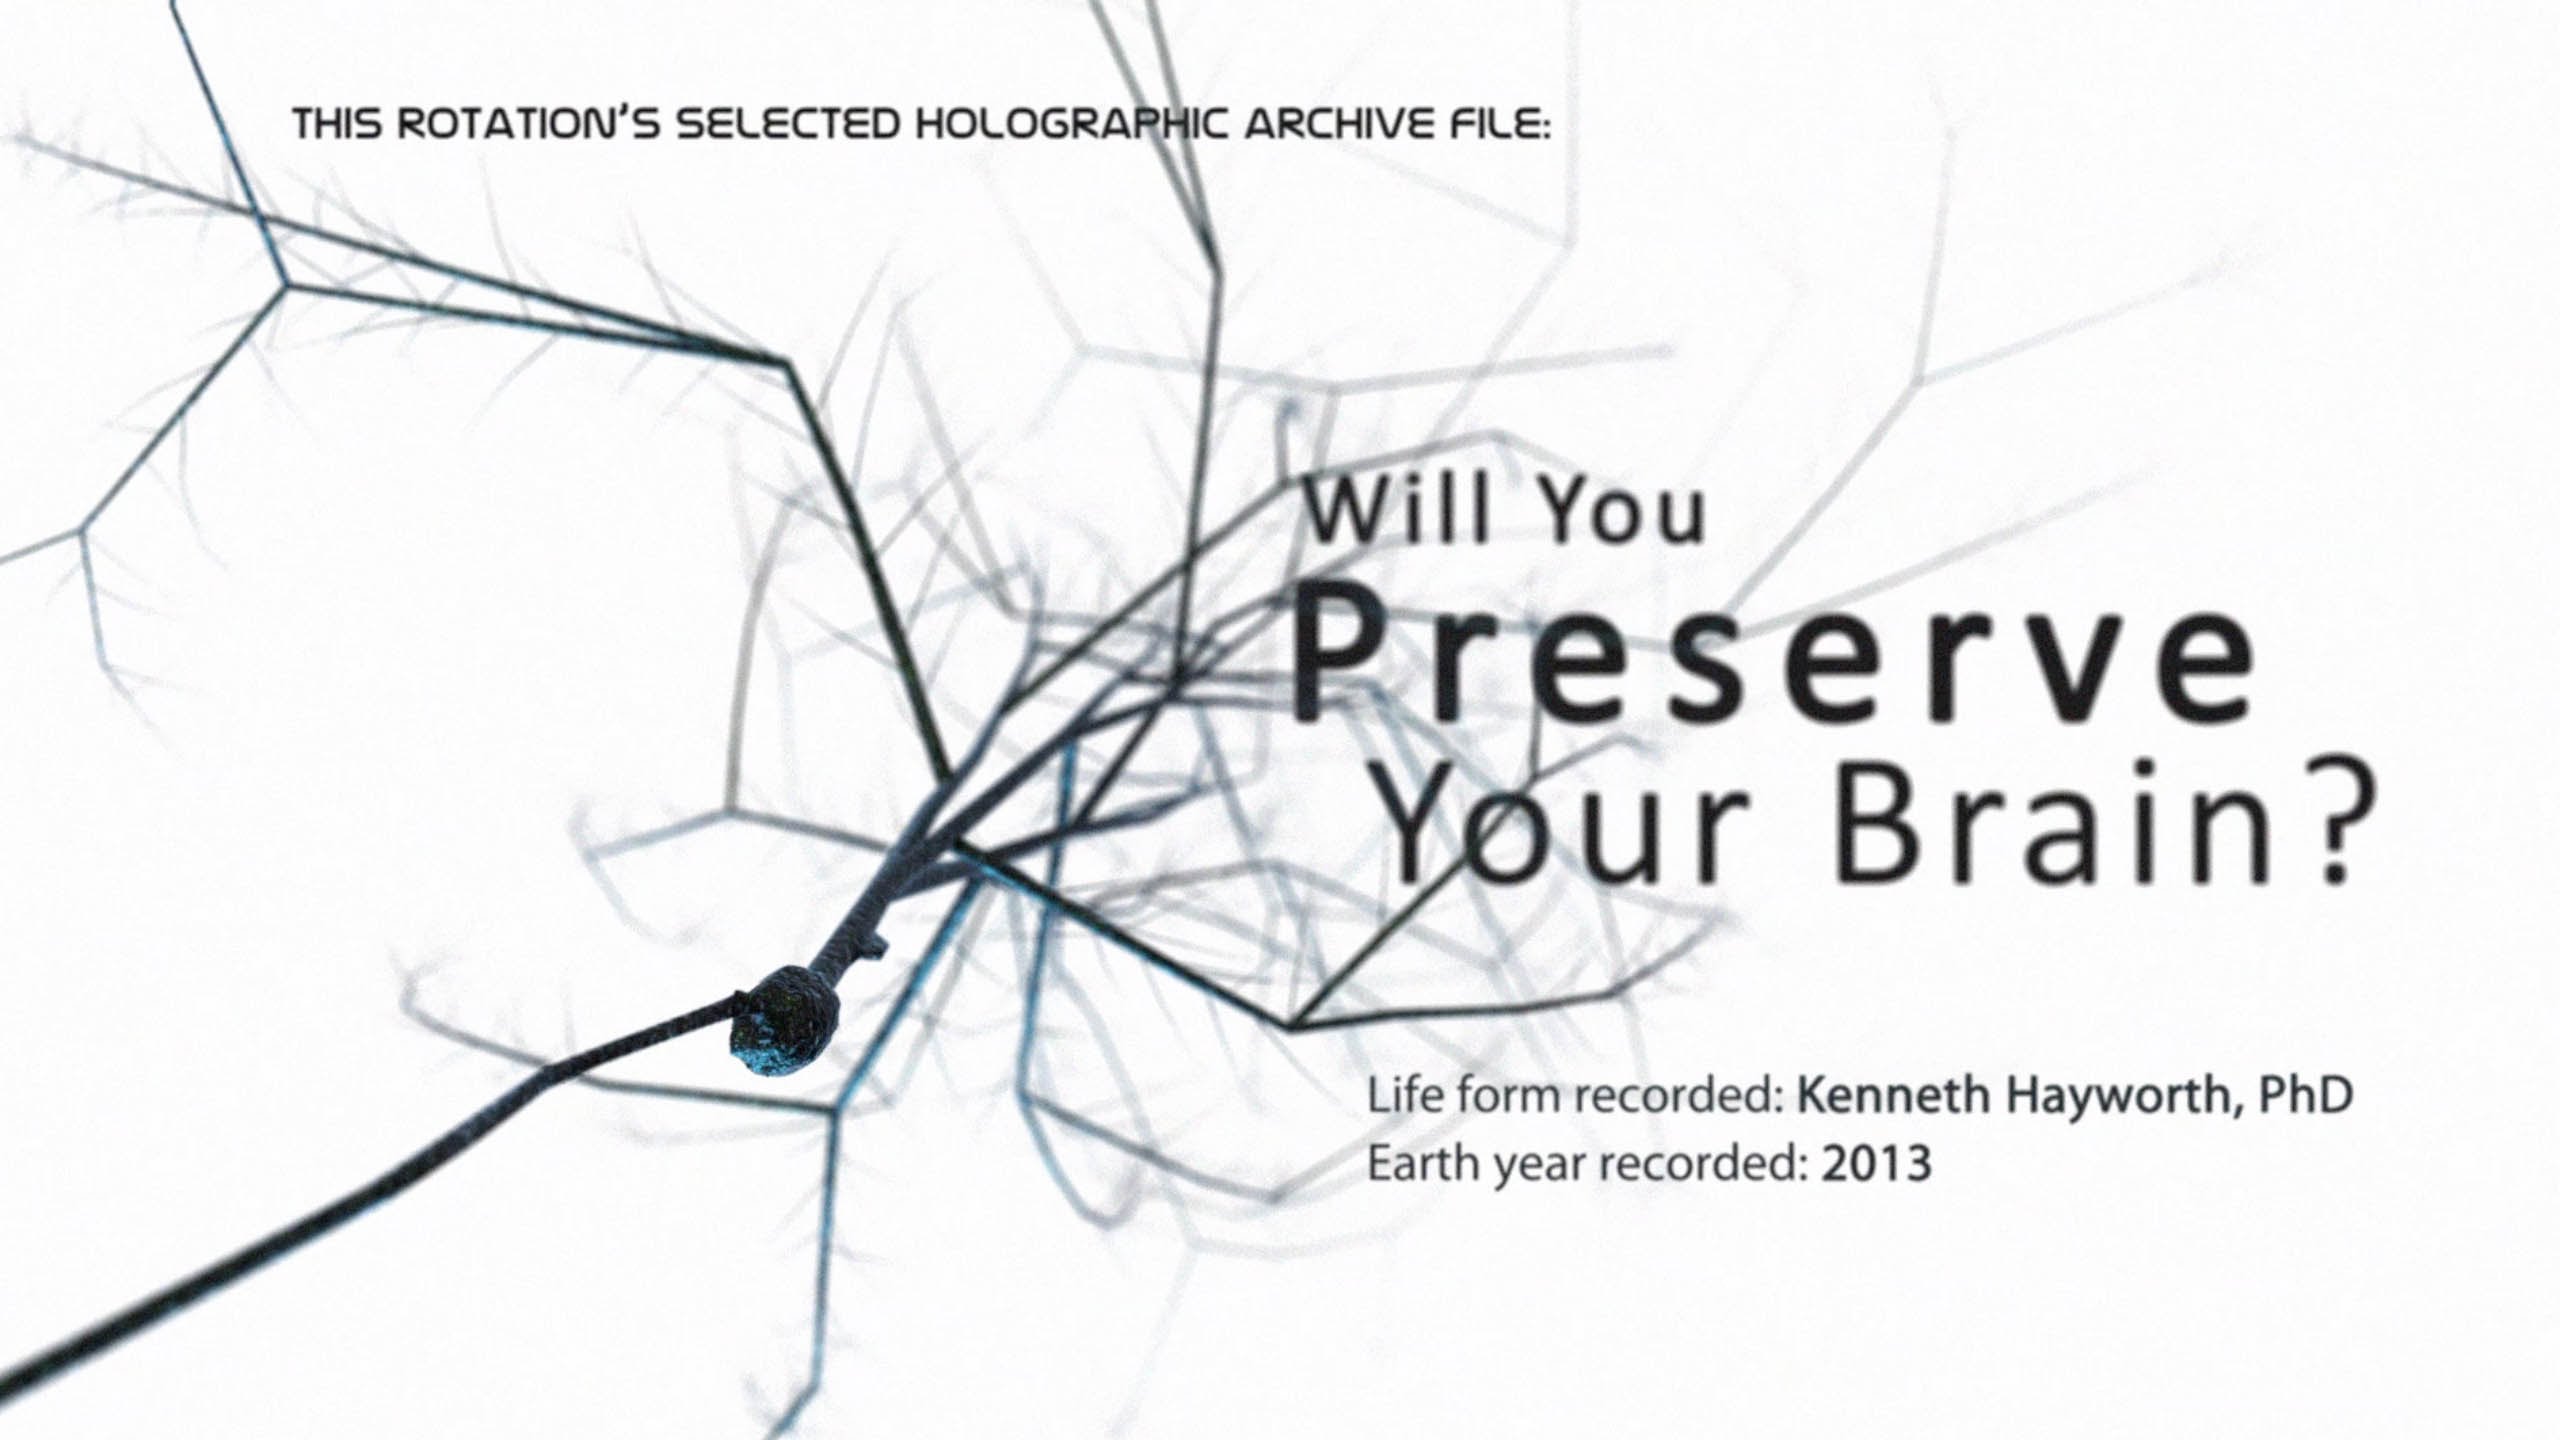 Would You Preserve Your Brain?